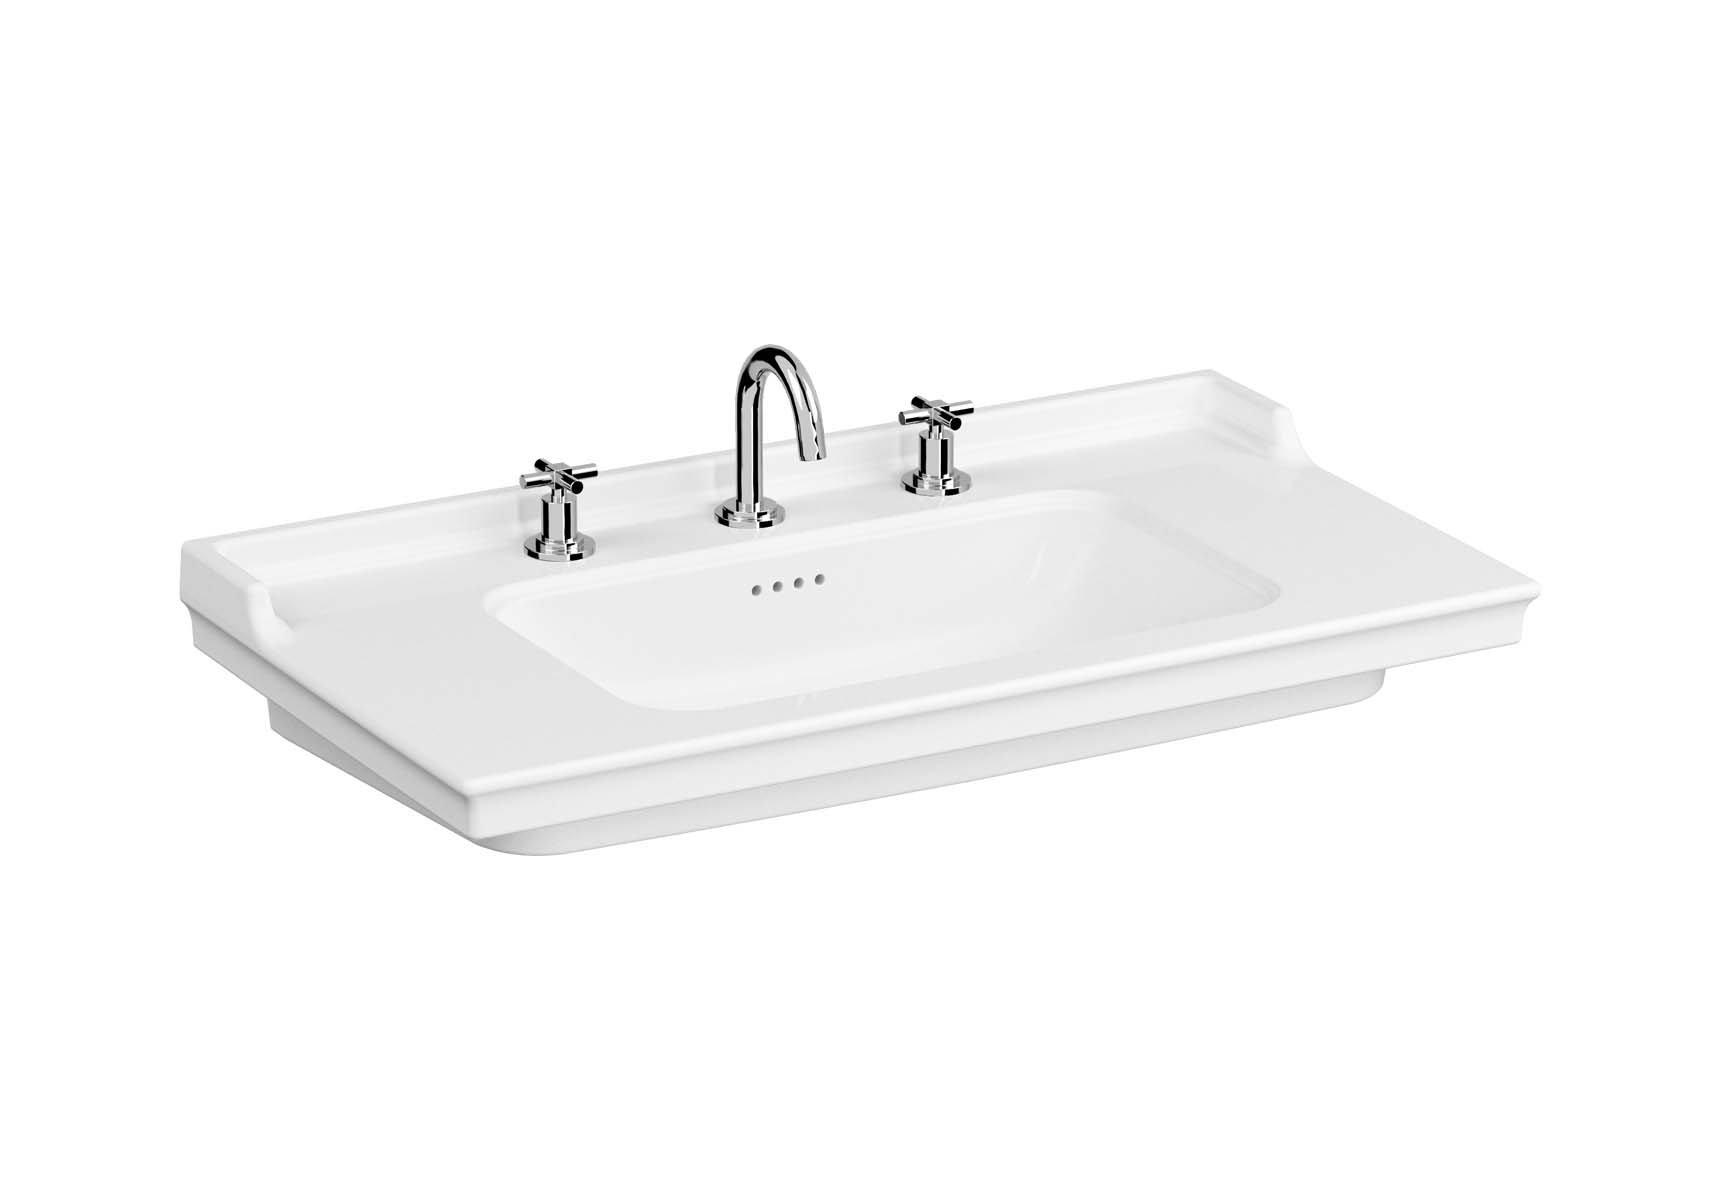 Vanity Basin, 100 cm, One Tap Hole, With Overflow Hole, With Metallic Legs